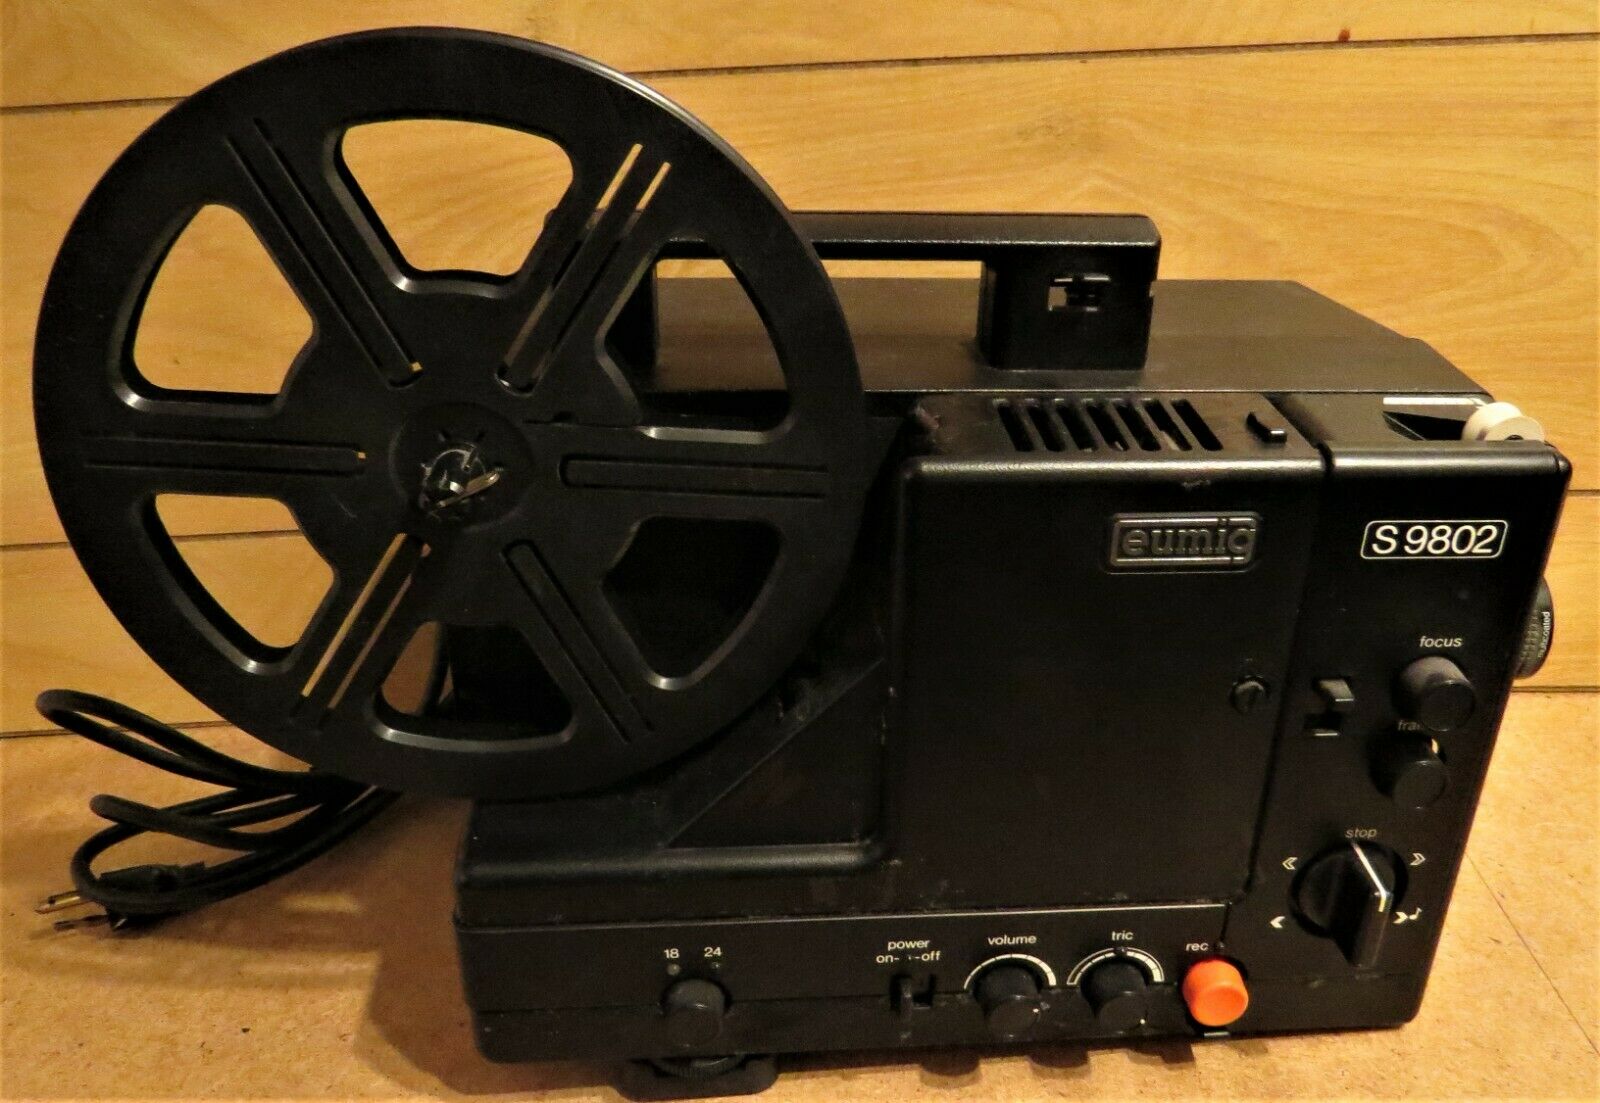 Eumig S9802 Super 8 Sound Projector Tested Partly Nice Condition